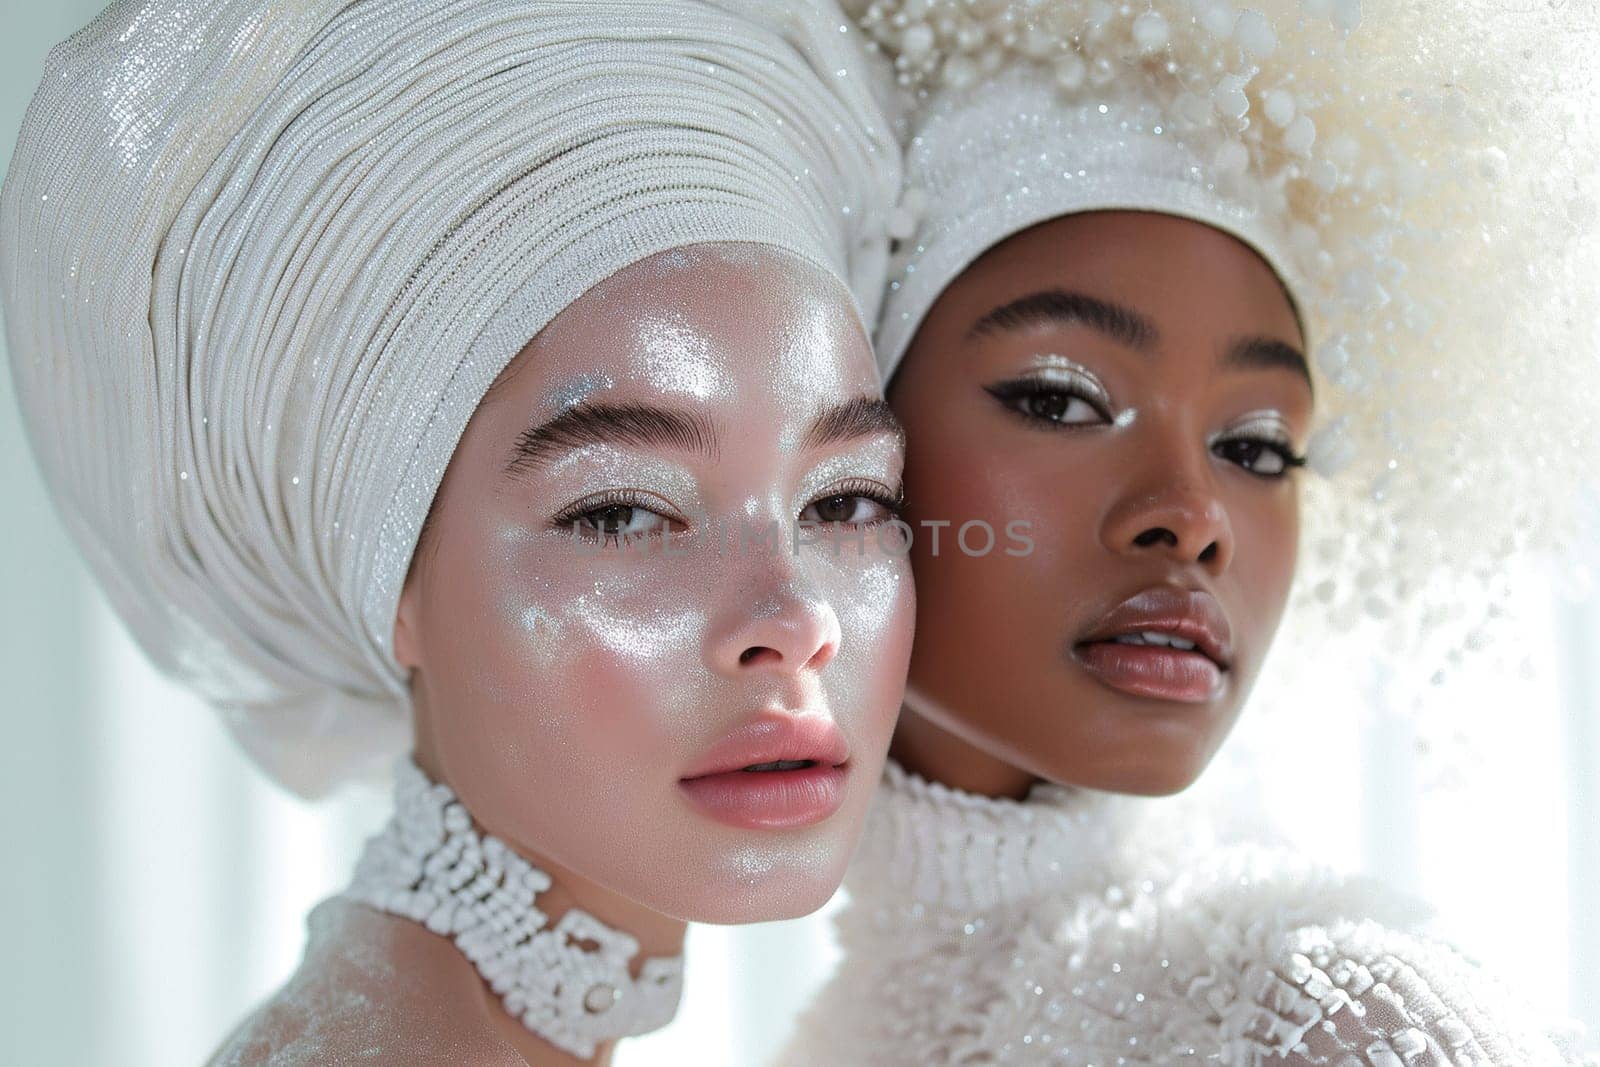 In a fashion shoot, two girls of different nationalities with elegant white turbans embody the beauty of variety and style